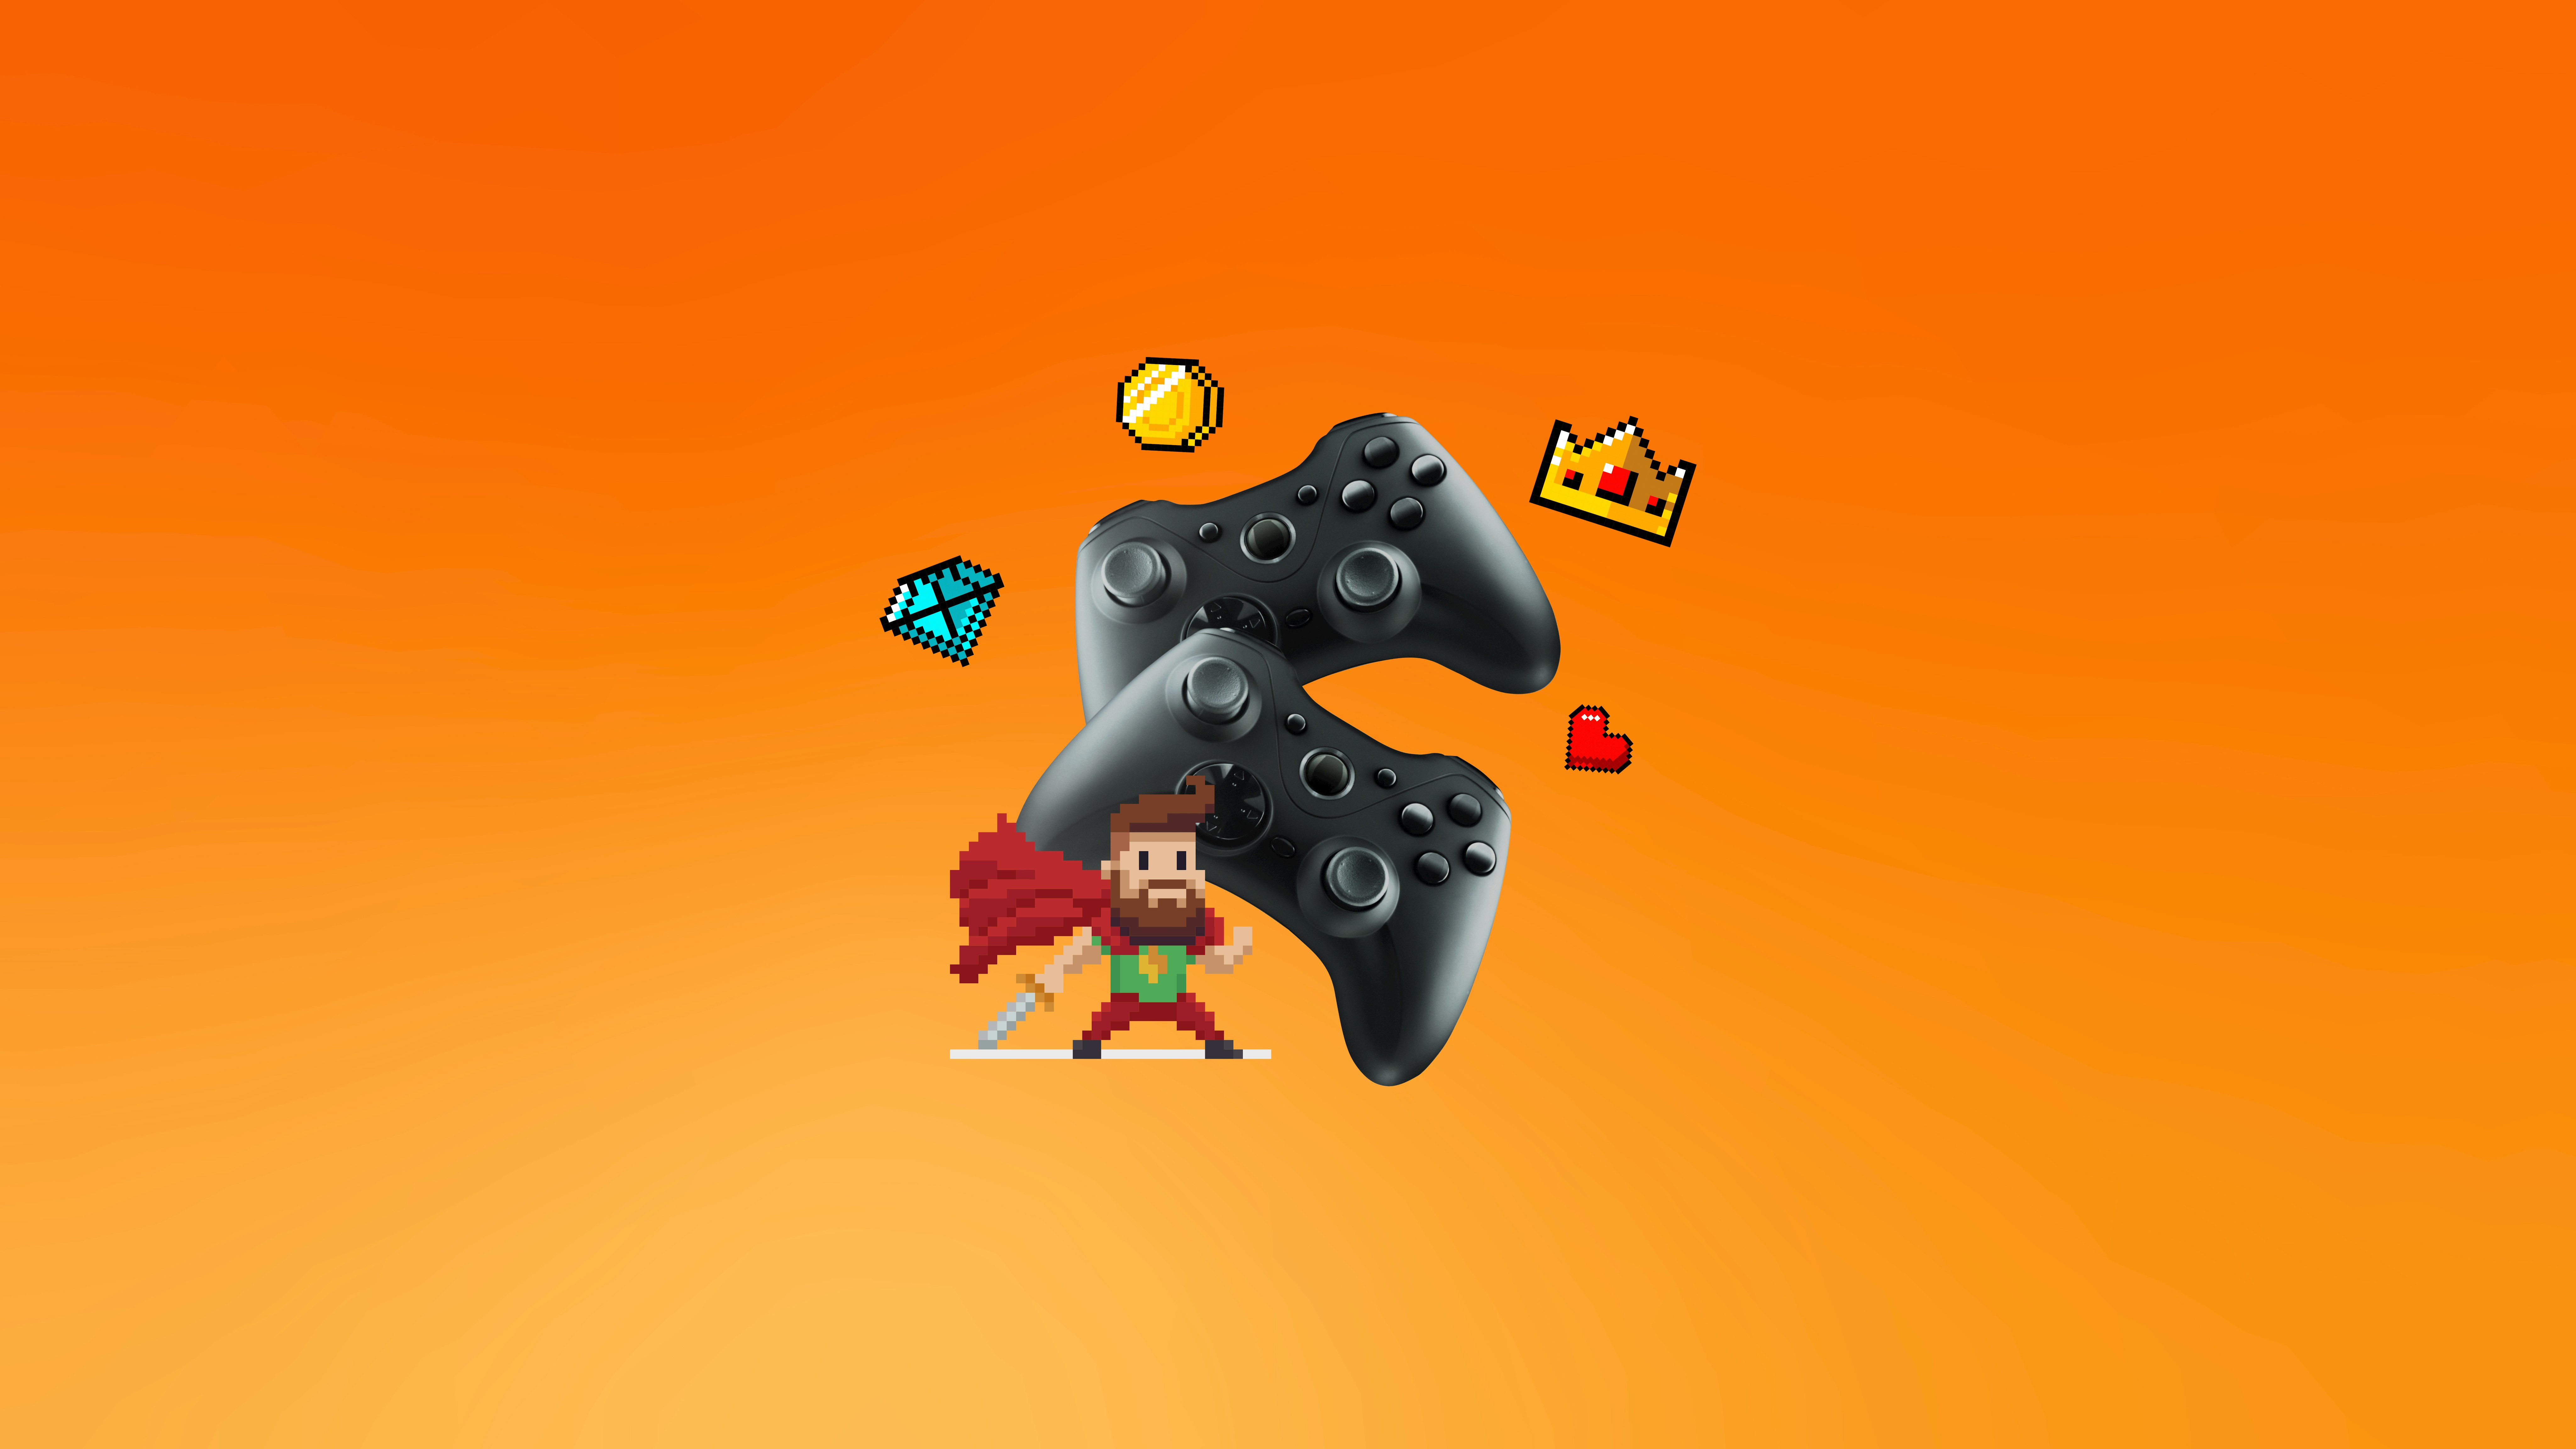 digital collage of video game controllers, pixelated game icons including a diamond, bejeweled crown, sword-wielding hero, gold coin, and red heart